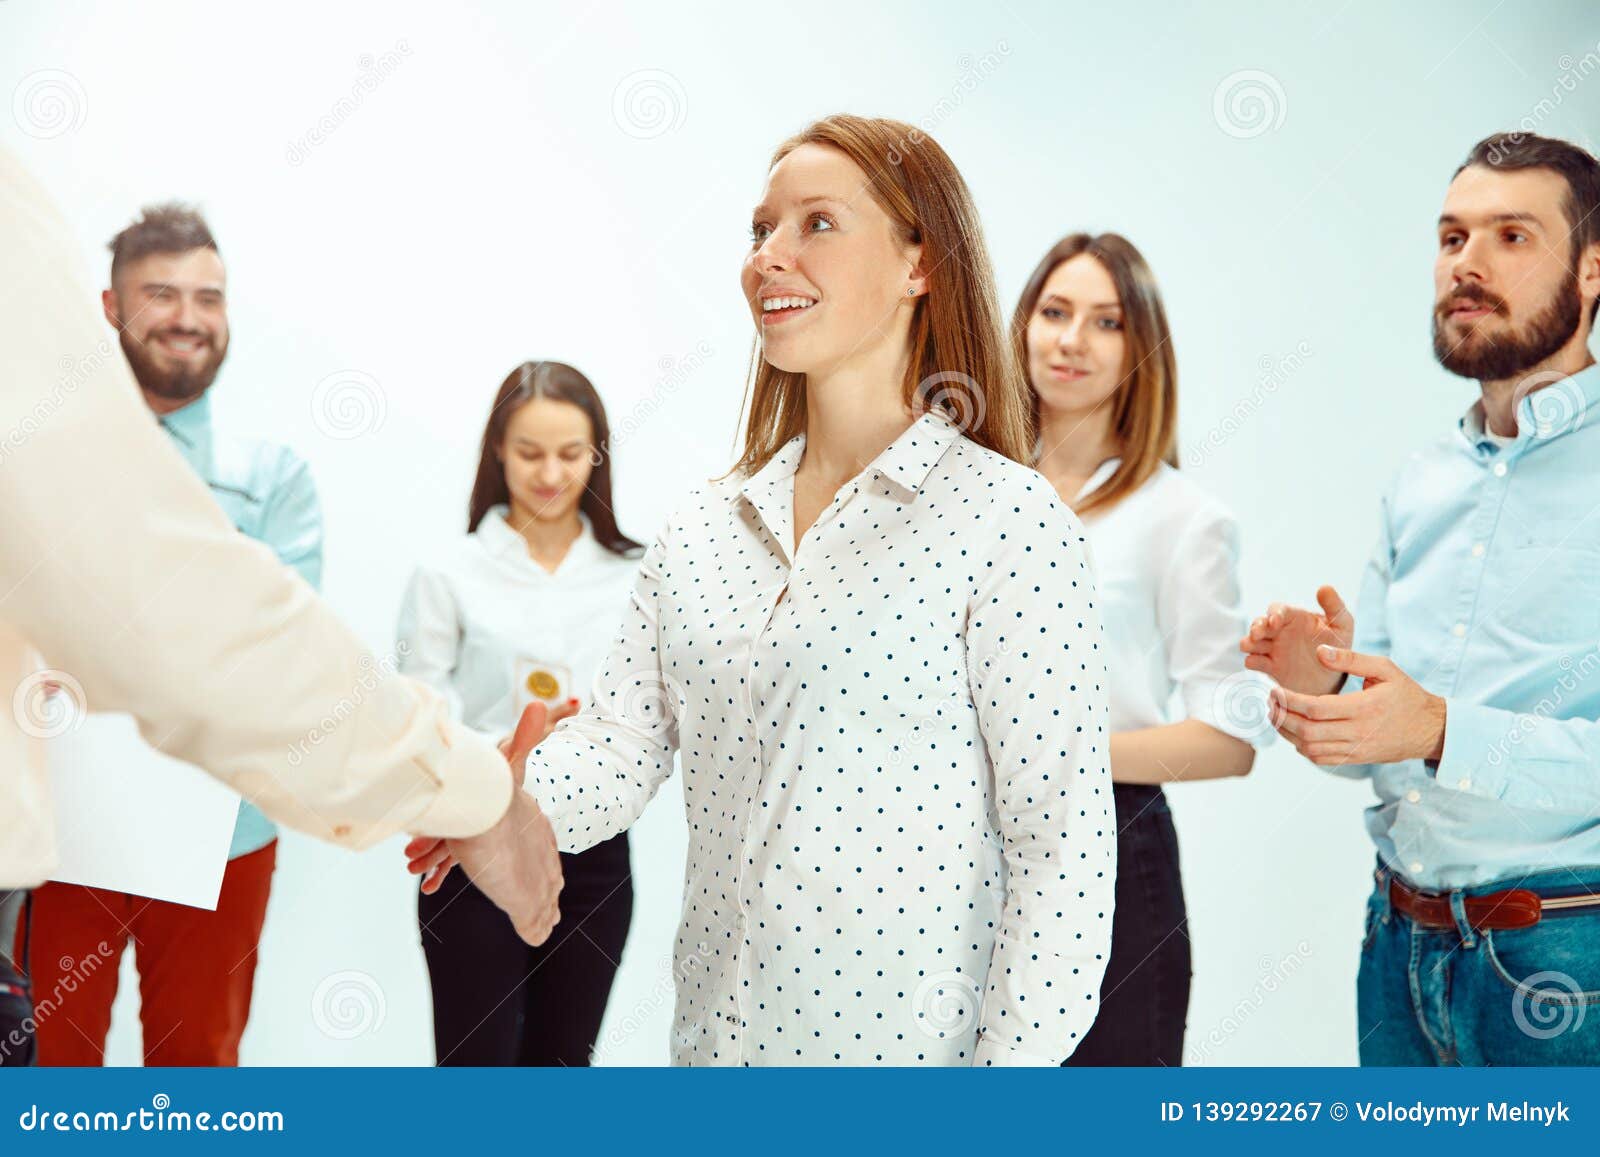 boss approving and congratulating young successful employee